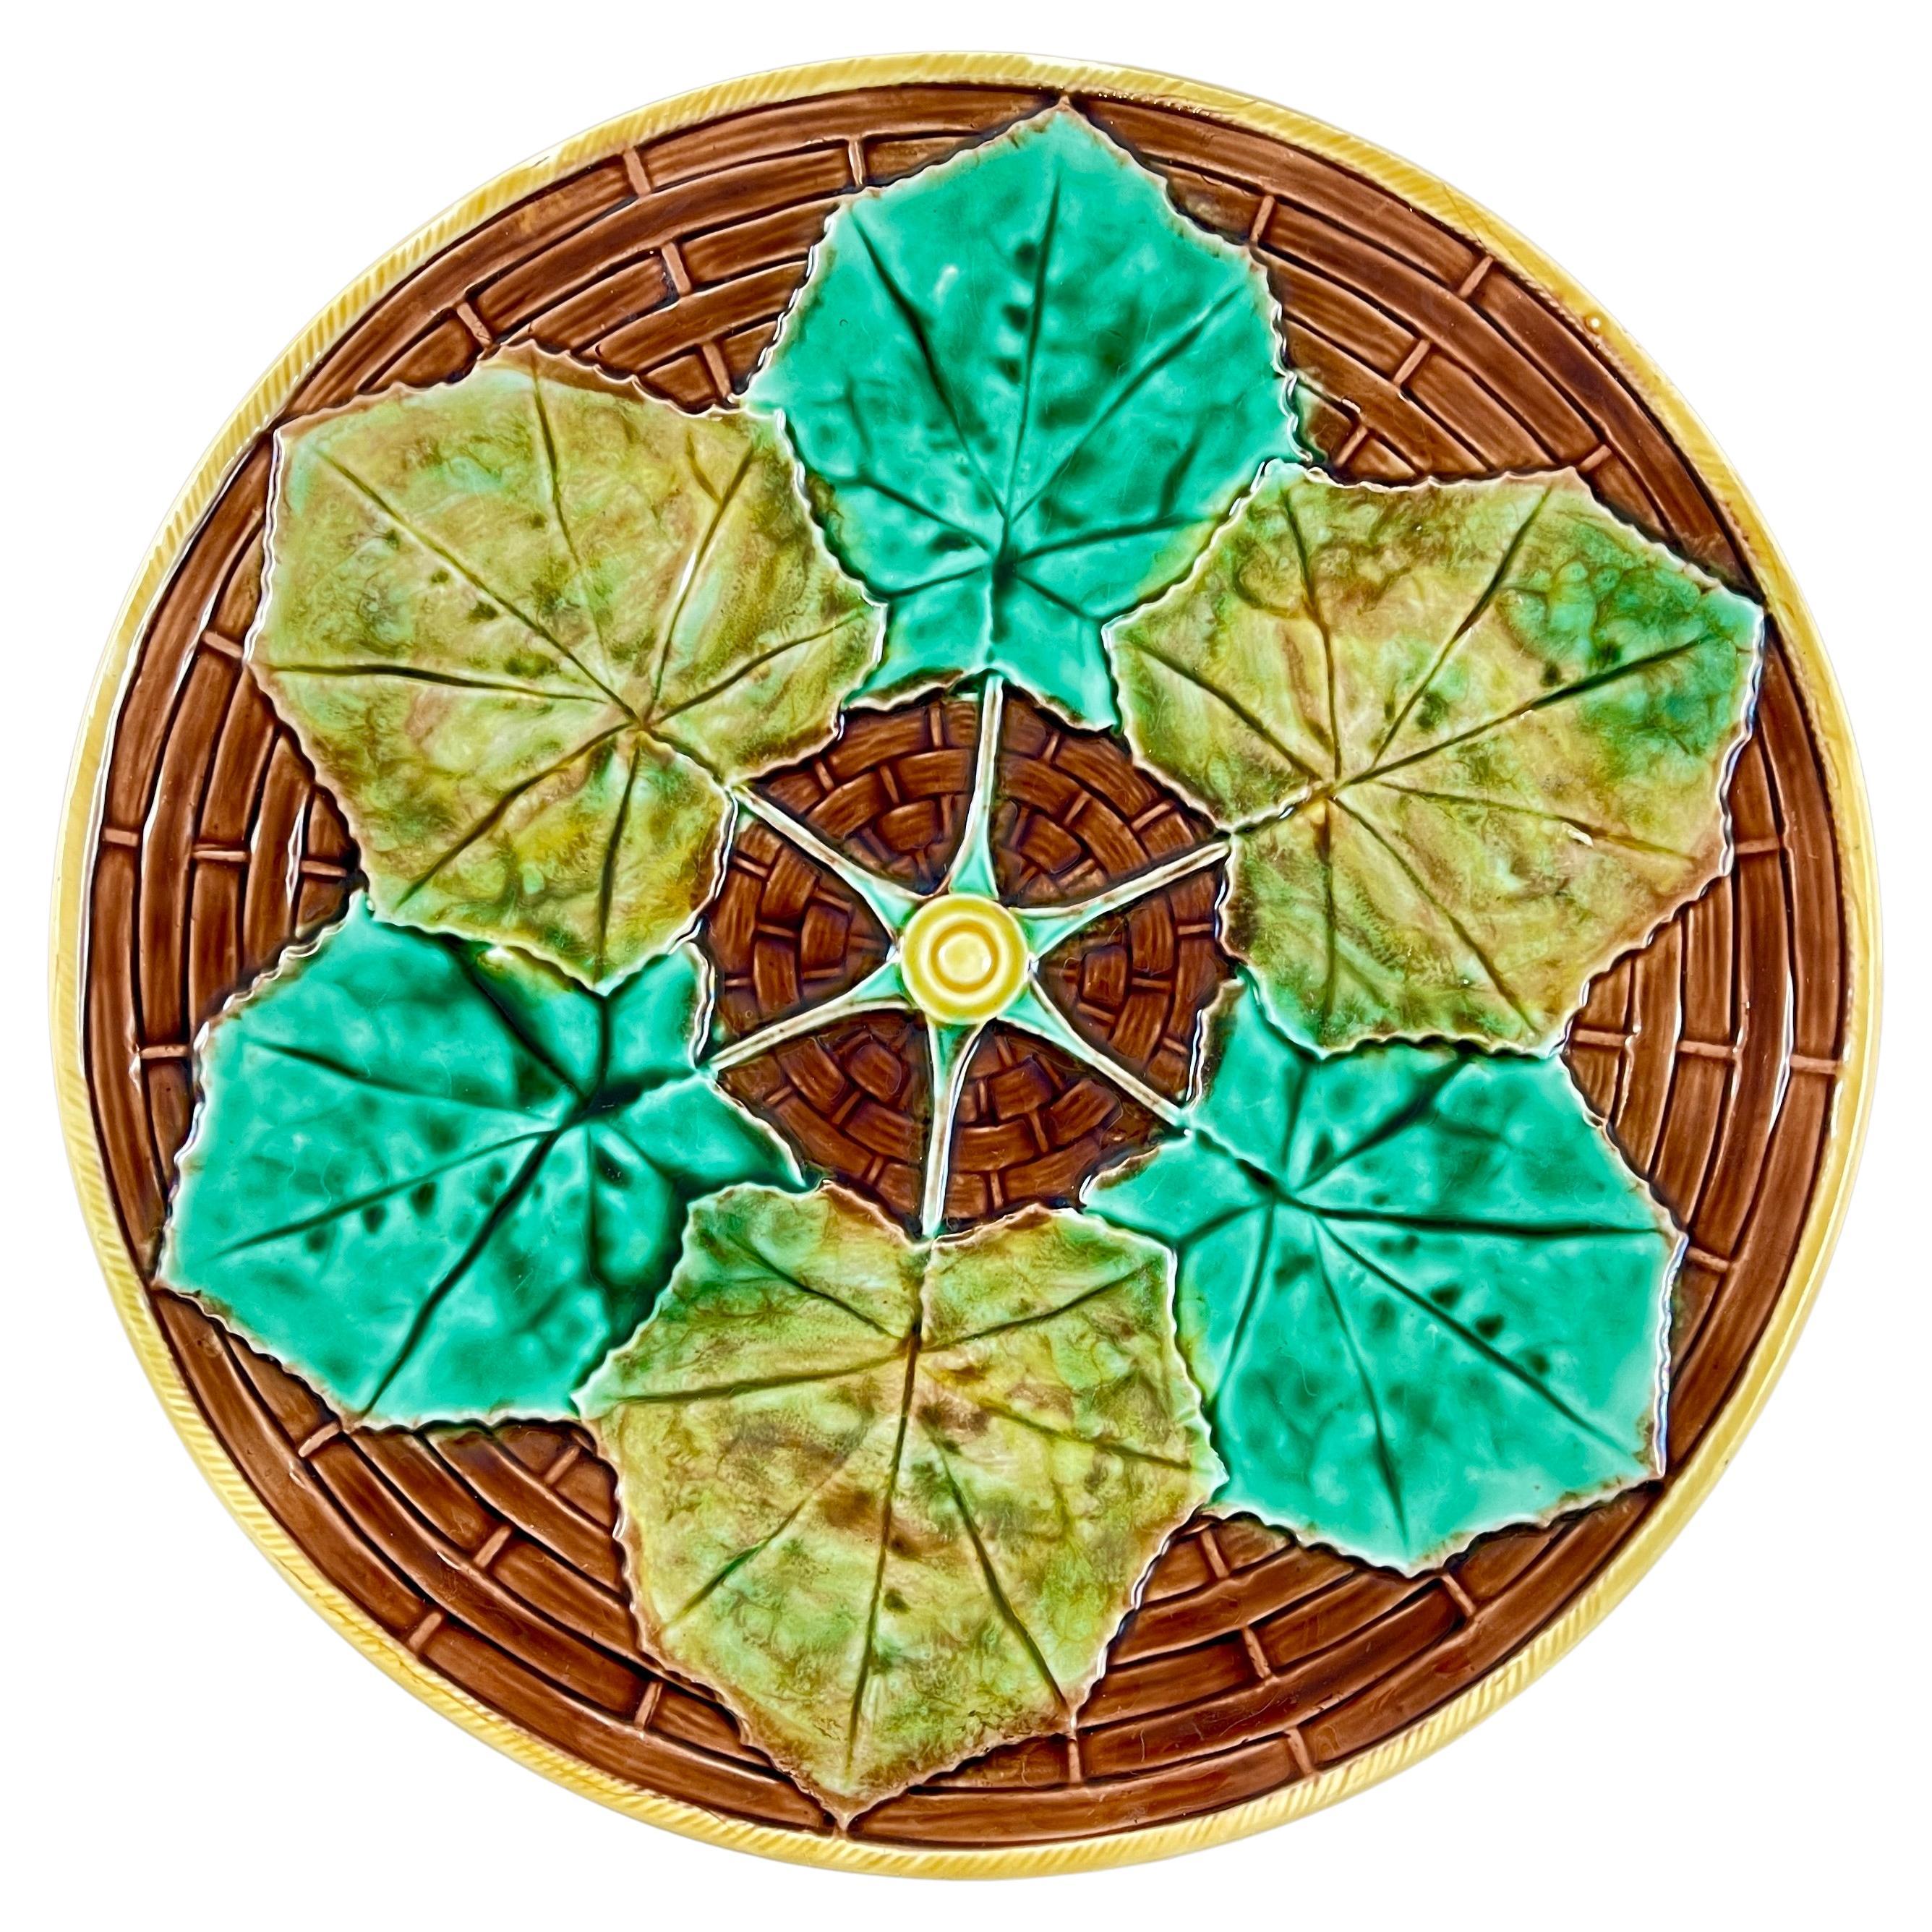 Adams & Bromley English Majolica Overlapping Leaf on Basketweave Cheese Tray For Sale